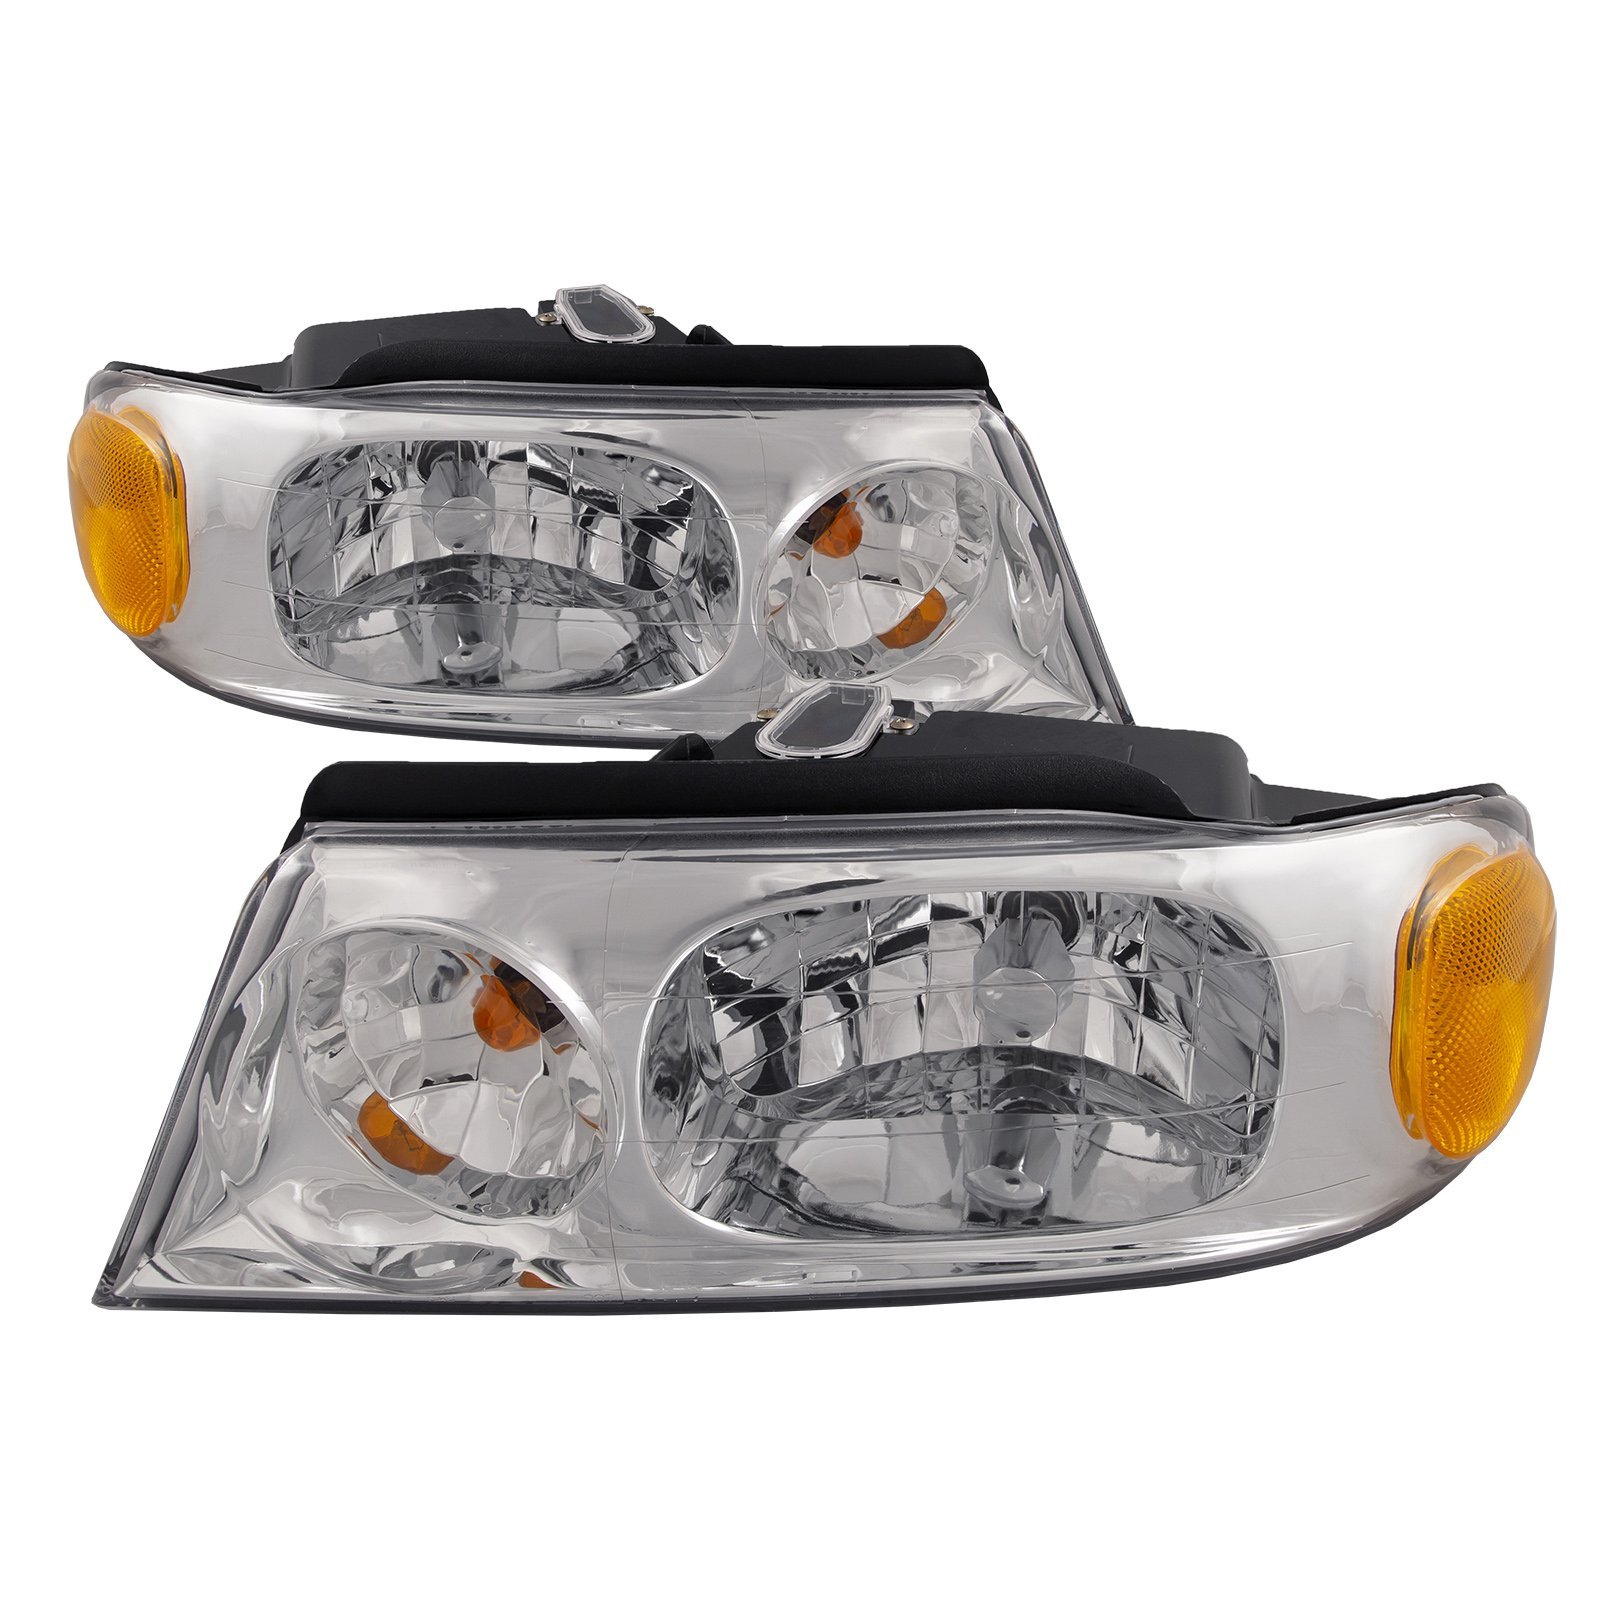 Beaver Motor Coach Marquis 2006-2009 RV Motorhome Pair Replacement Headlights Head Lights Front Lamps Left & Right 